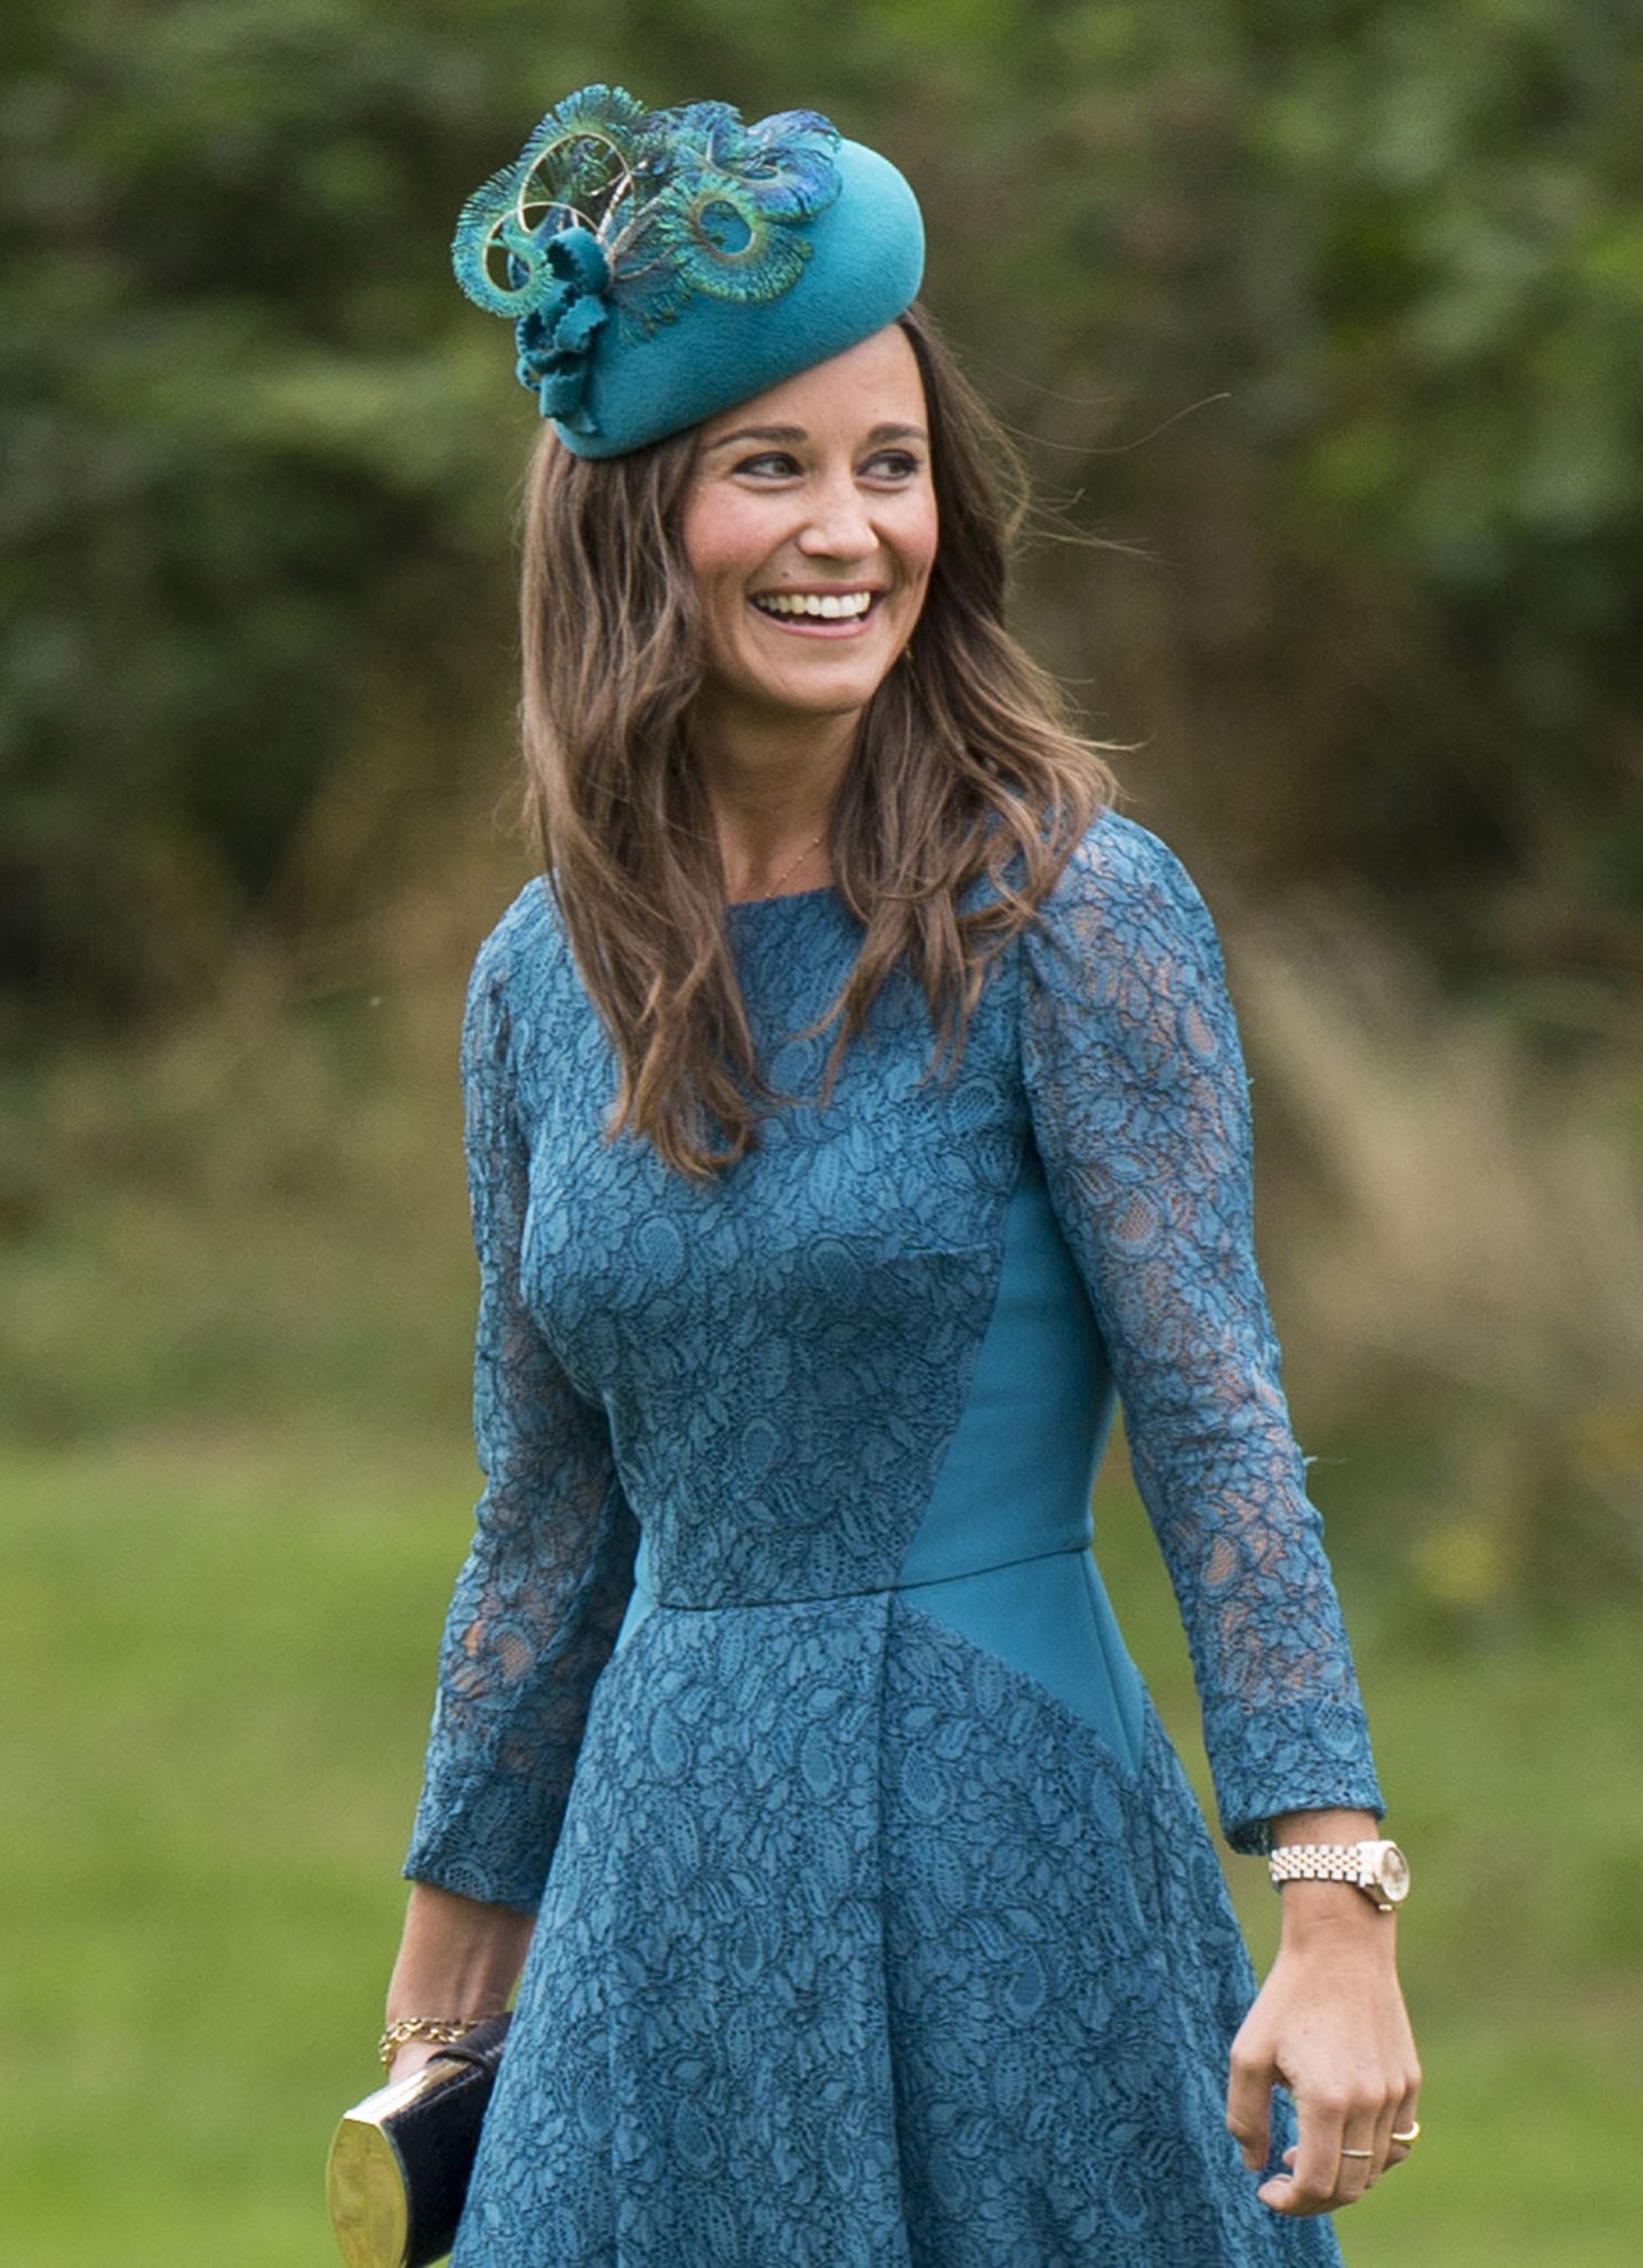 Pippa Middleton attends the wedding of James Meade and Lady Laura Marsham at The Parish Church of St. Nicholas in Gayton on September 14, 2013 in King's Lynn, England. | Source: Getty Images